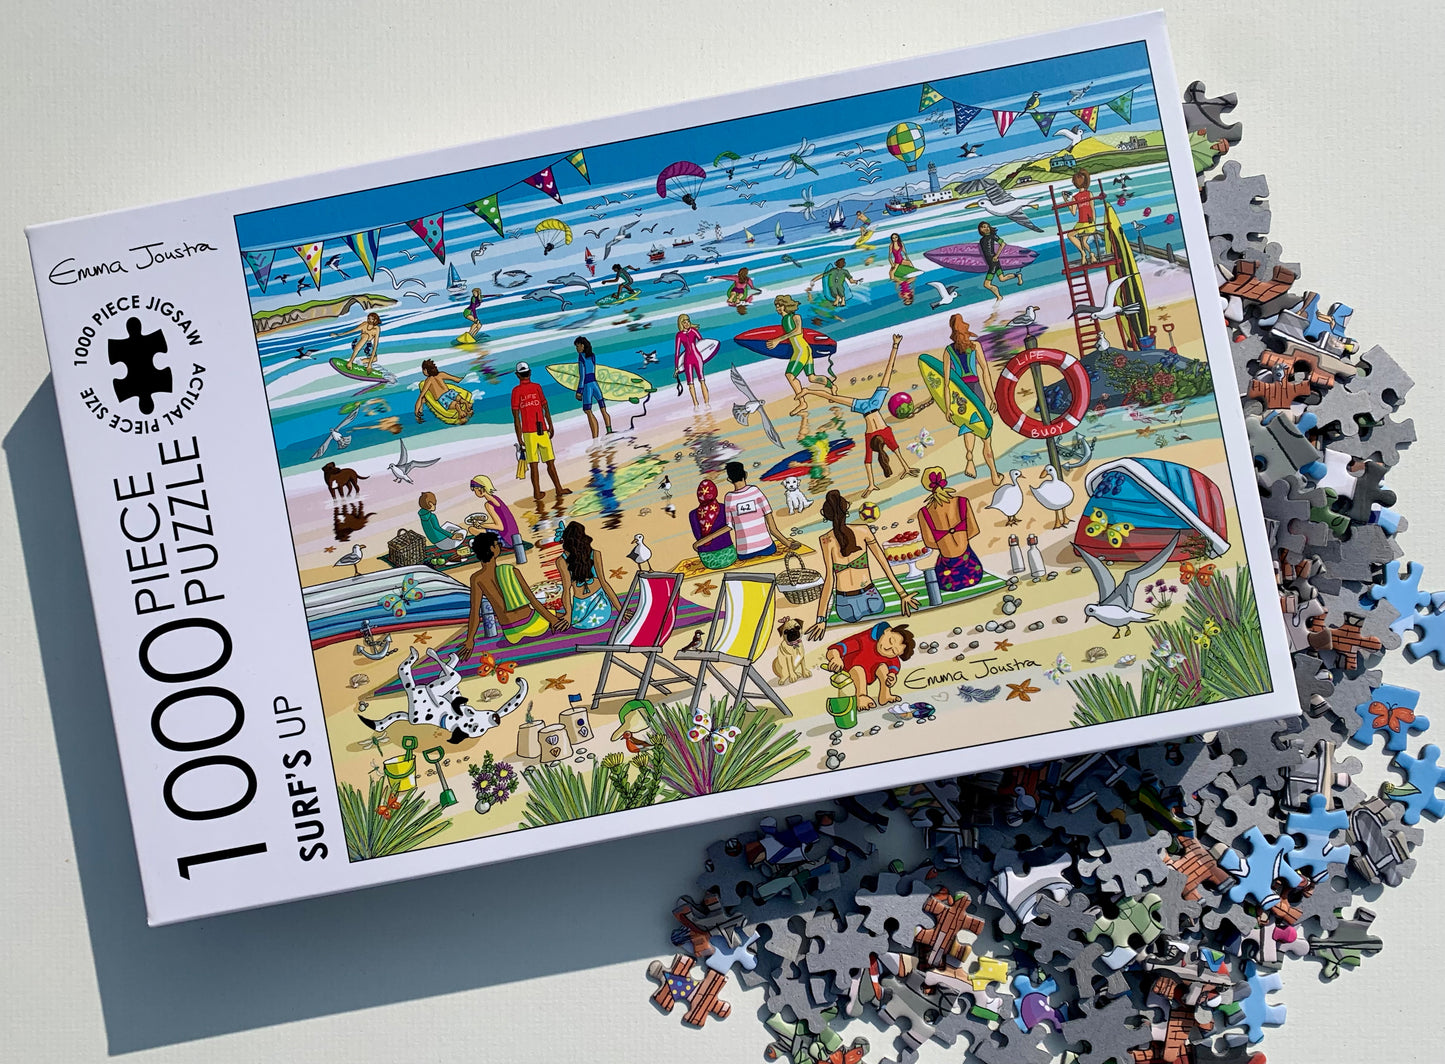 Surf's up 1,000 piece jigsaw puzzle